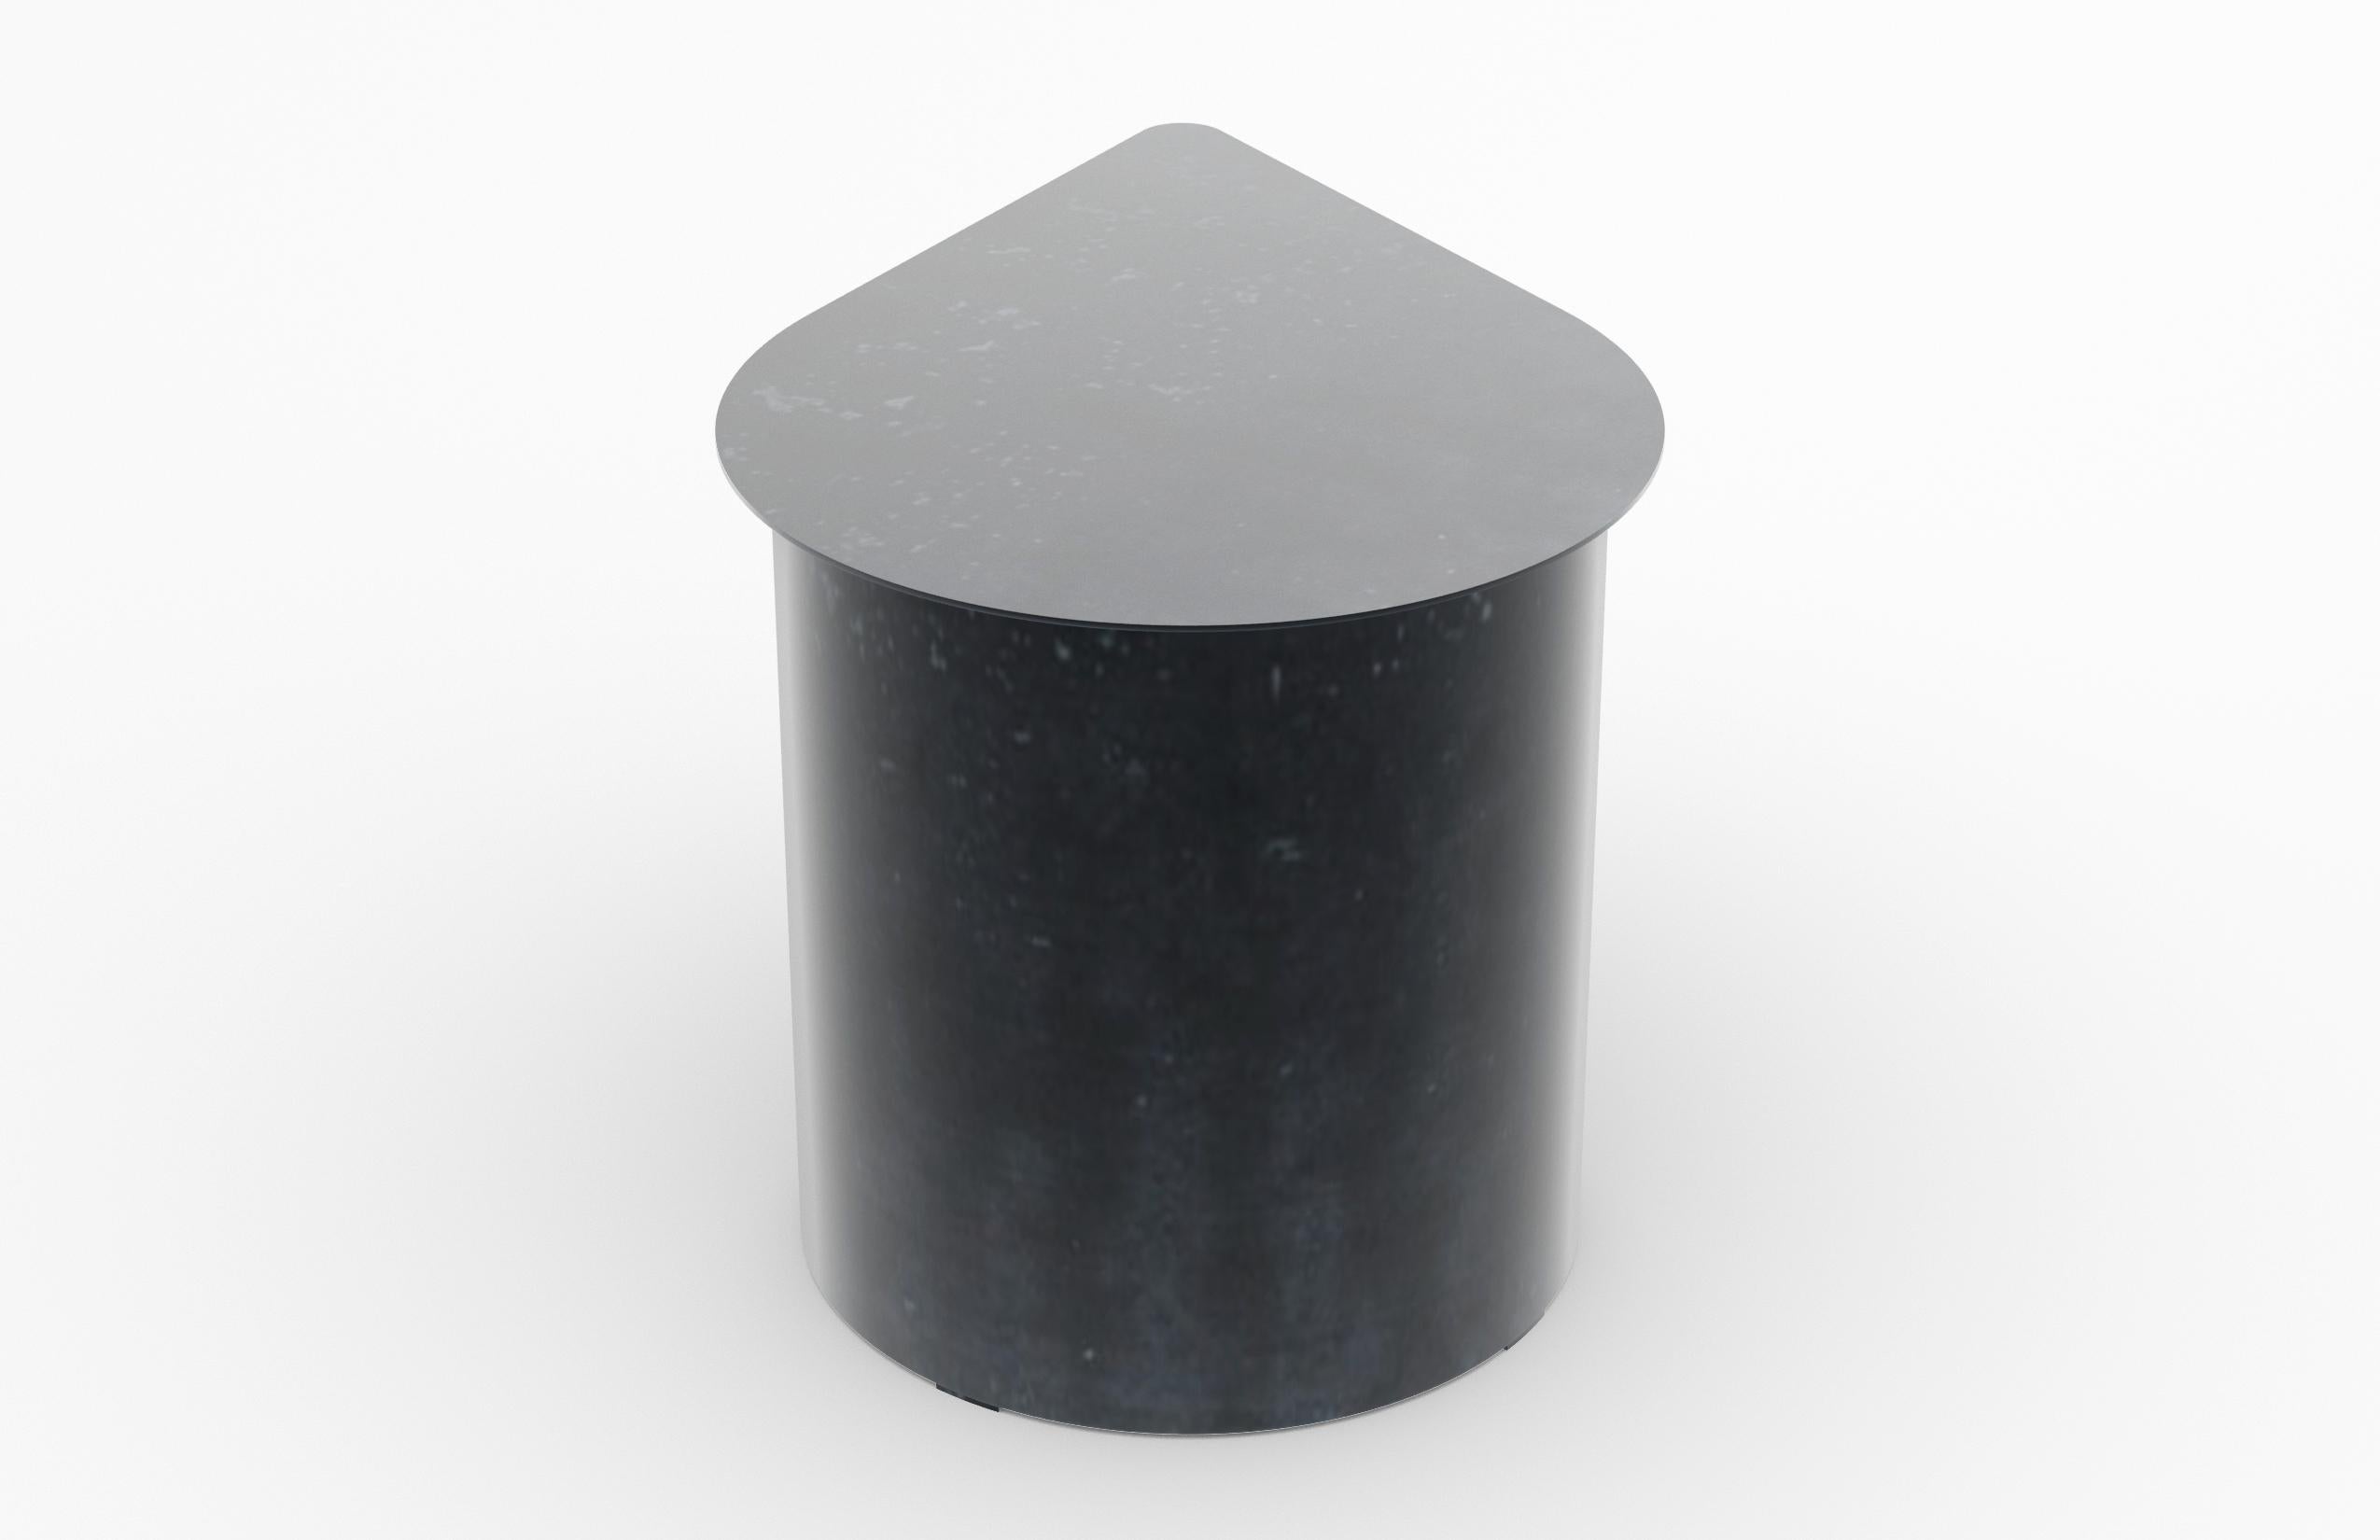 Minimalist Tangent End Table, Minimal Design in Waxed Raw Black Steel by Mtharu For Sale